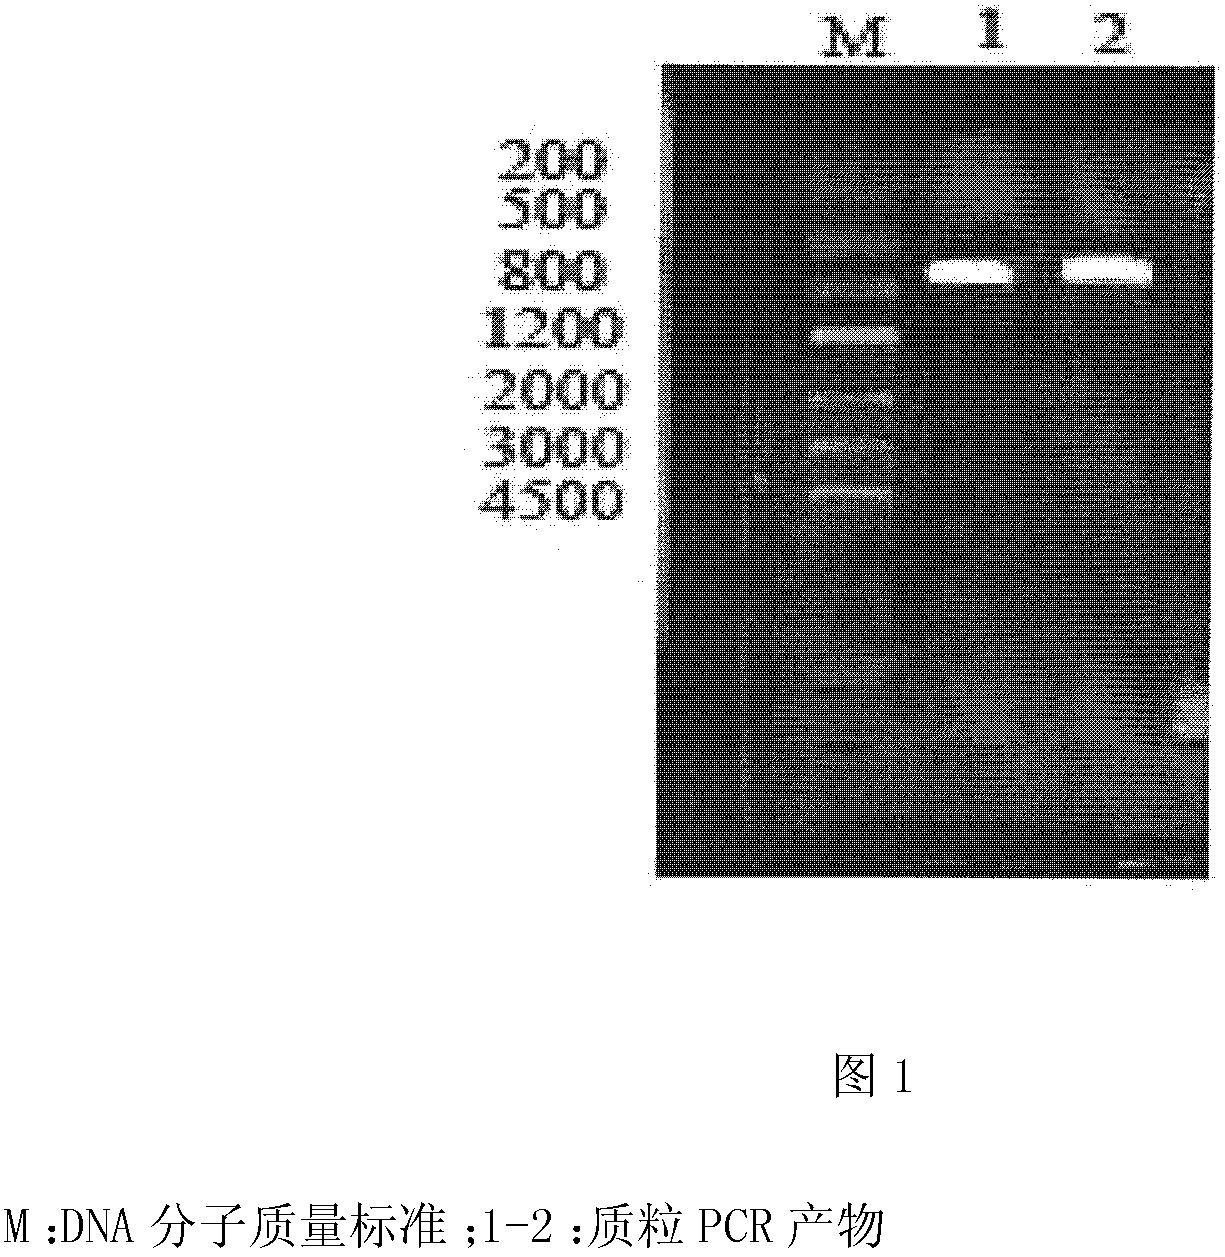 Recombined subunit vaccine of haemaphysalis concinna and preparation method thereof